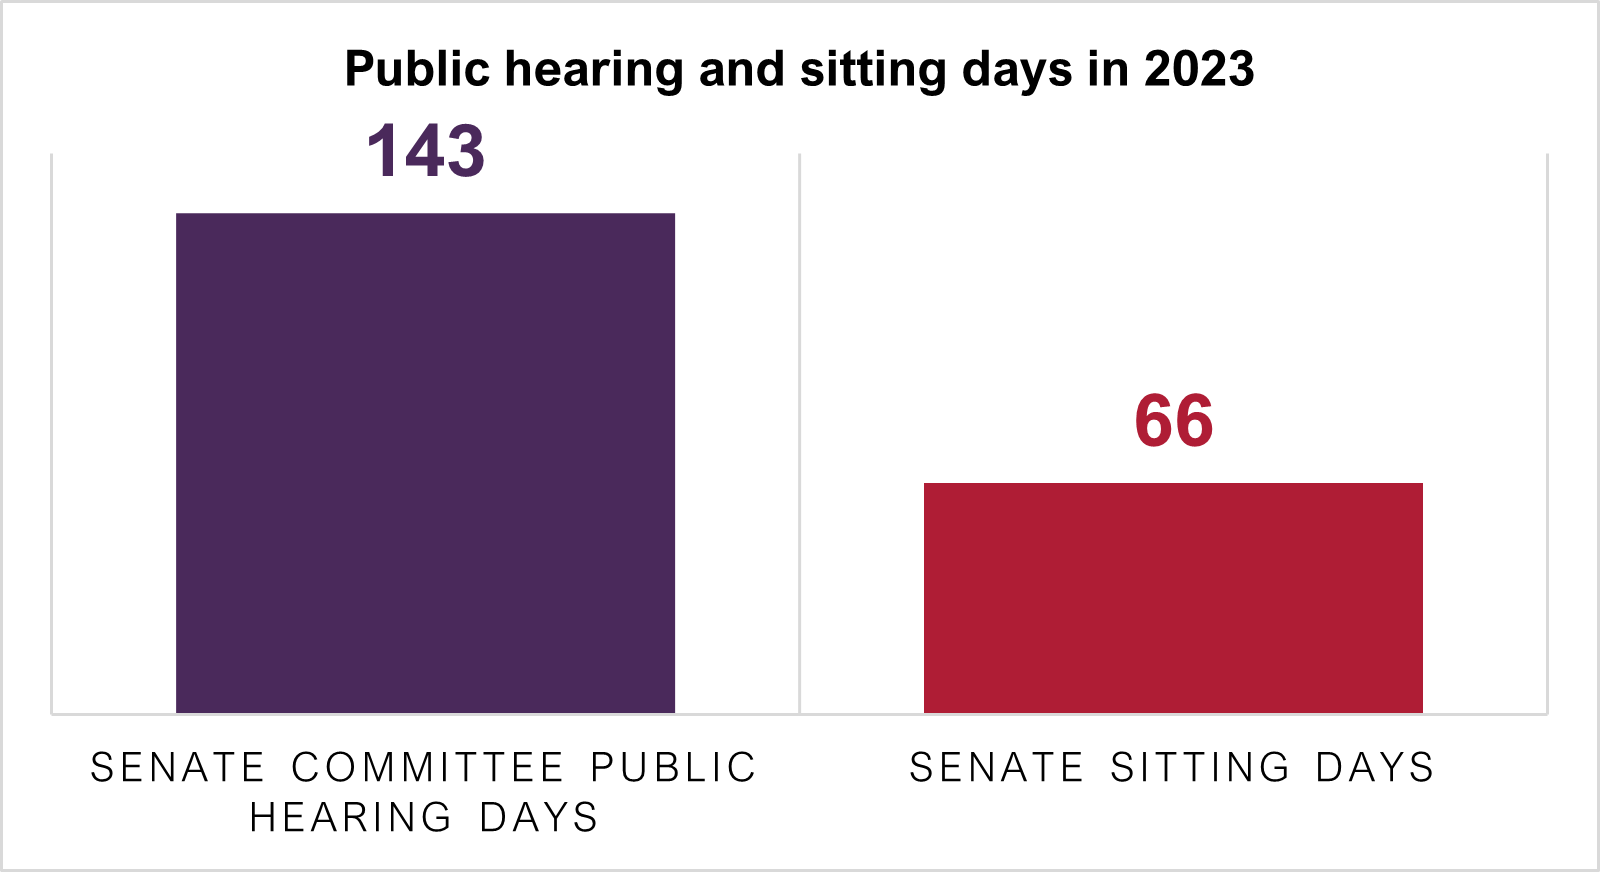 A graph showing the number of days in committee public hearings (143) to sitting days (66)